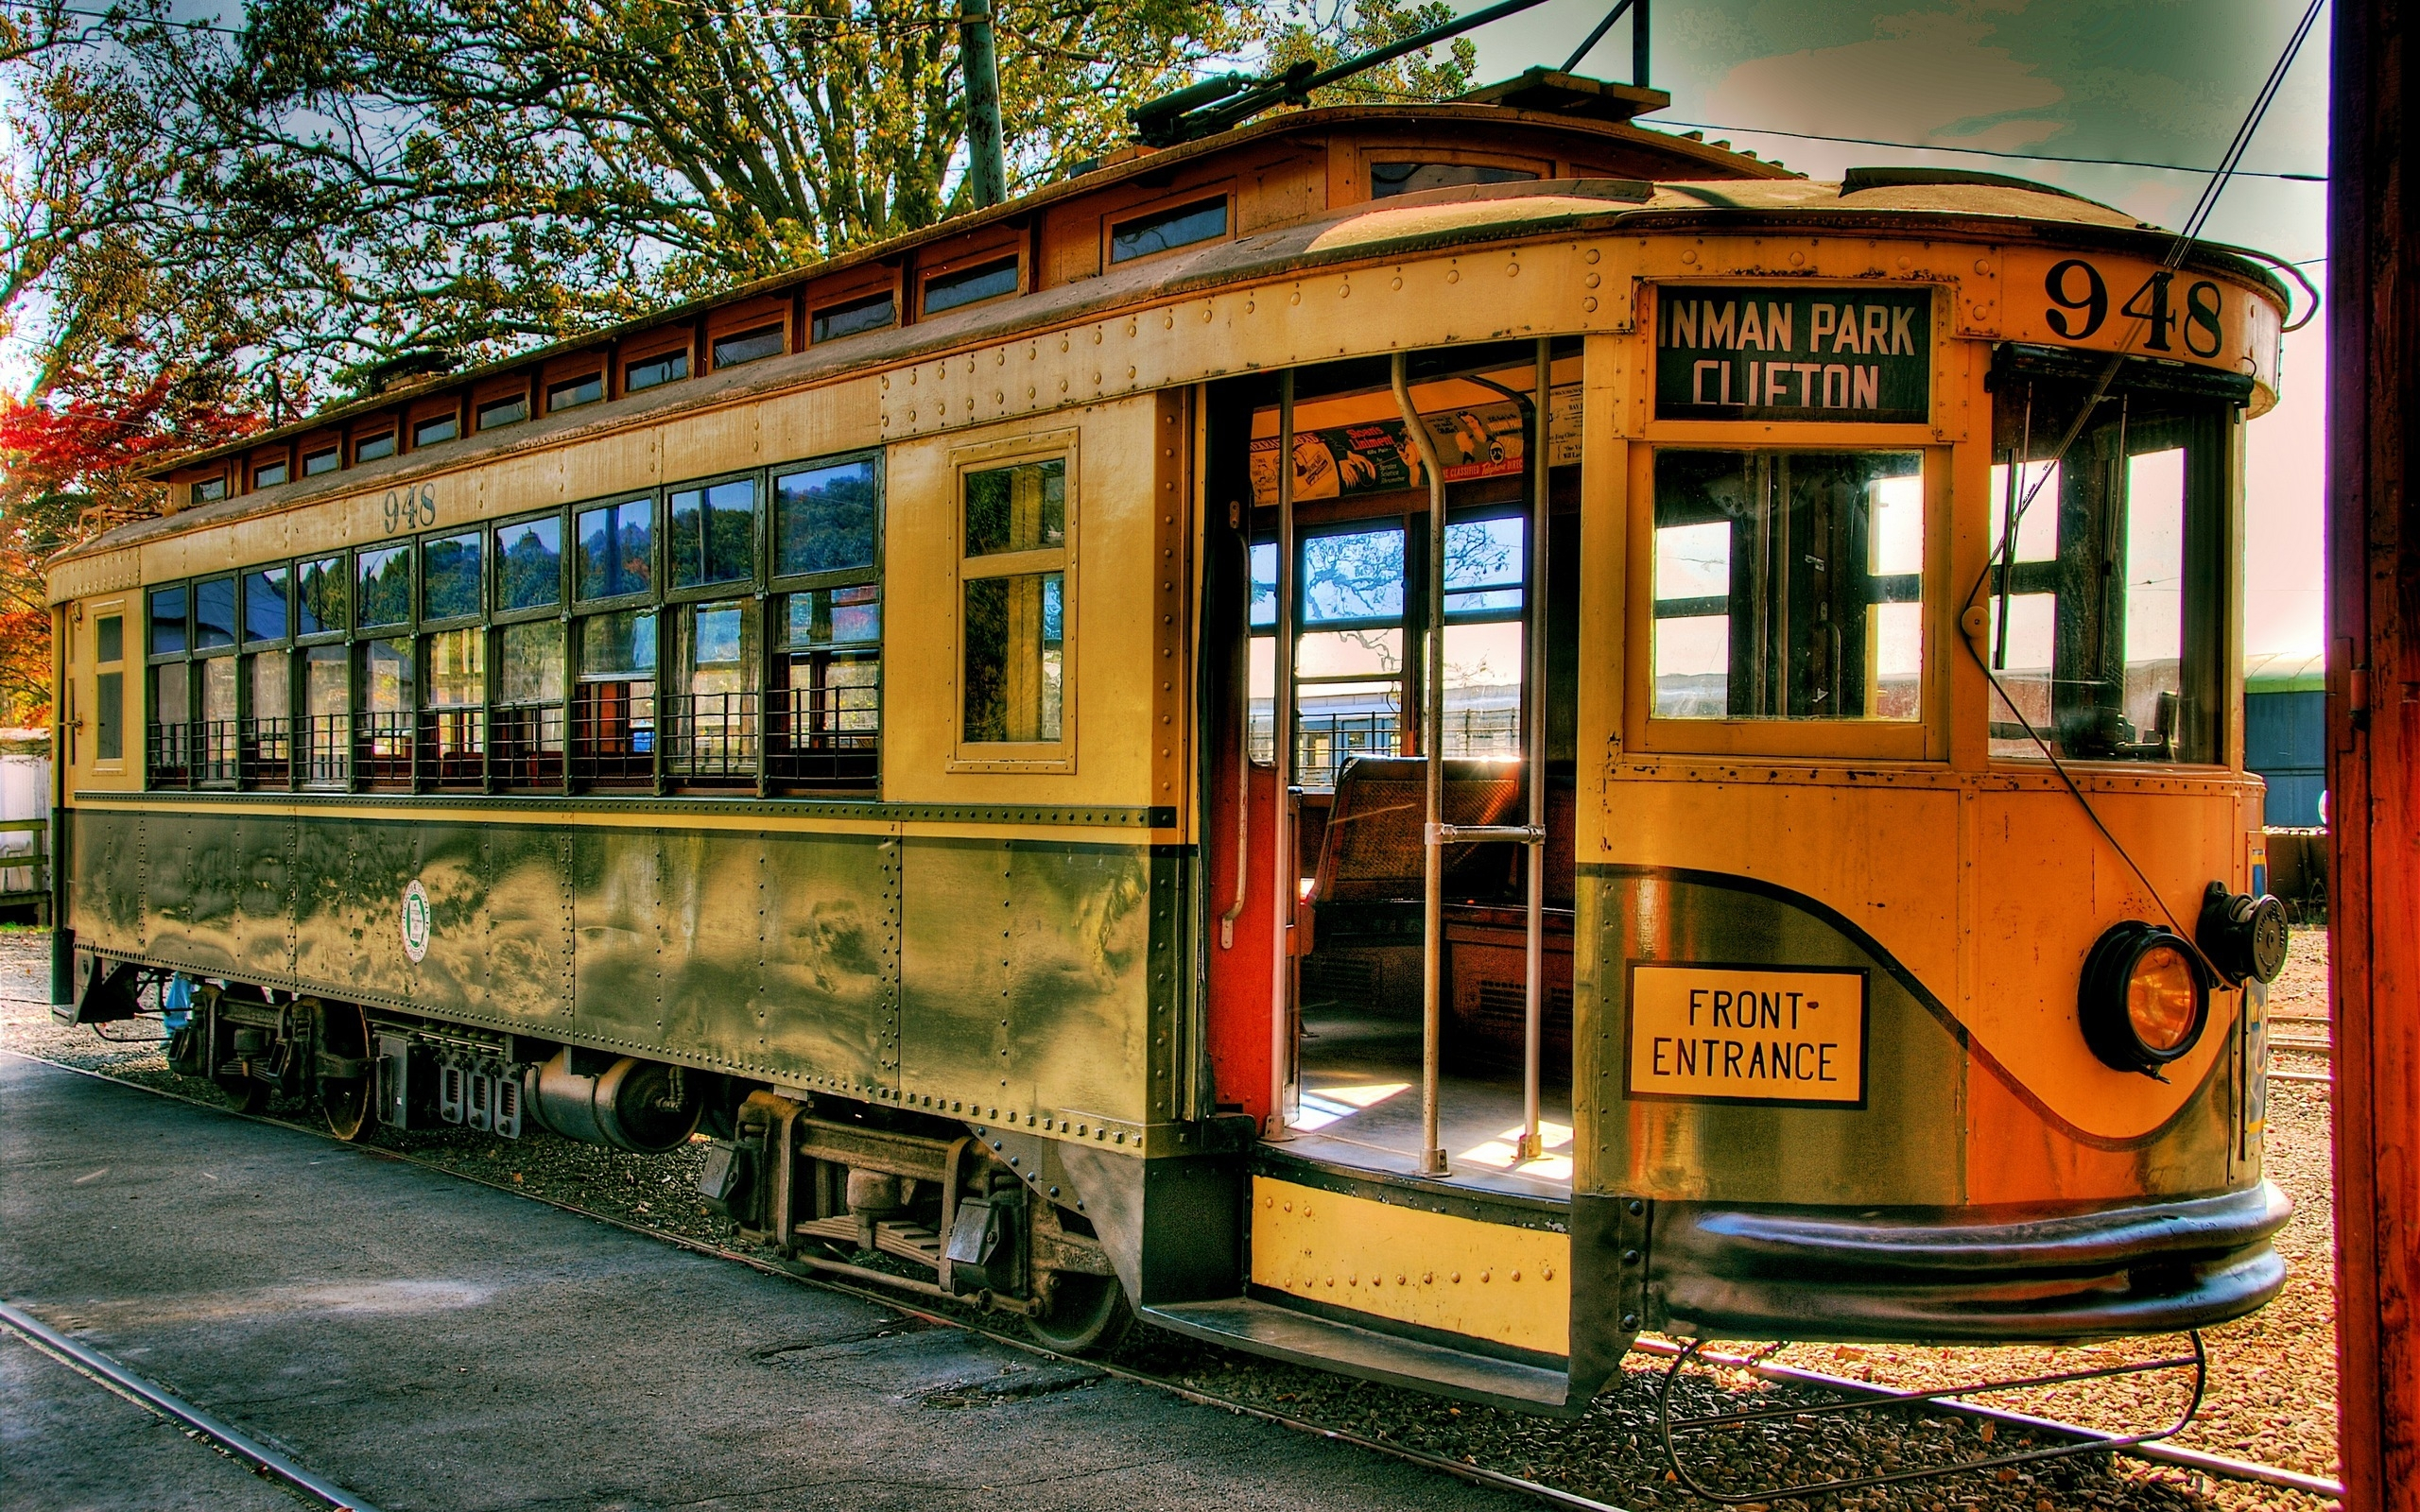 Old Tram - HD desktop wallpaper showcasing a vintage tram. Perfect for tram enthusiasts.